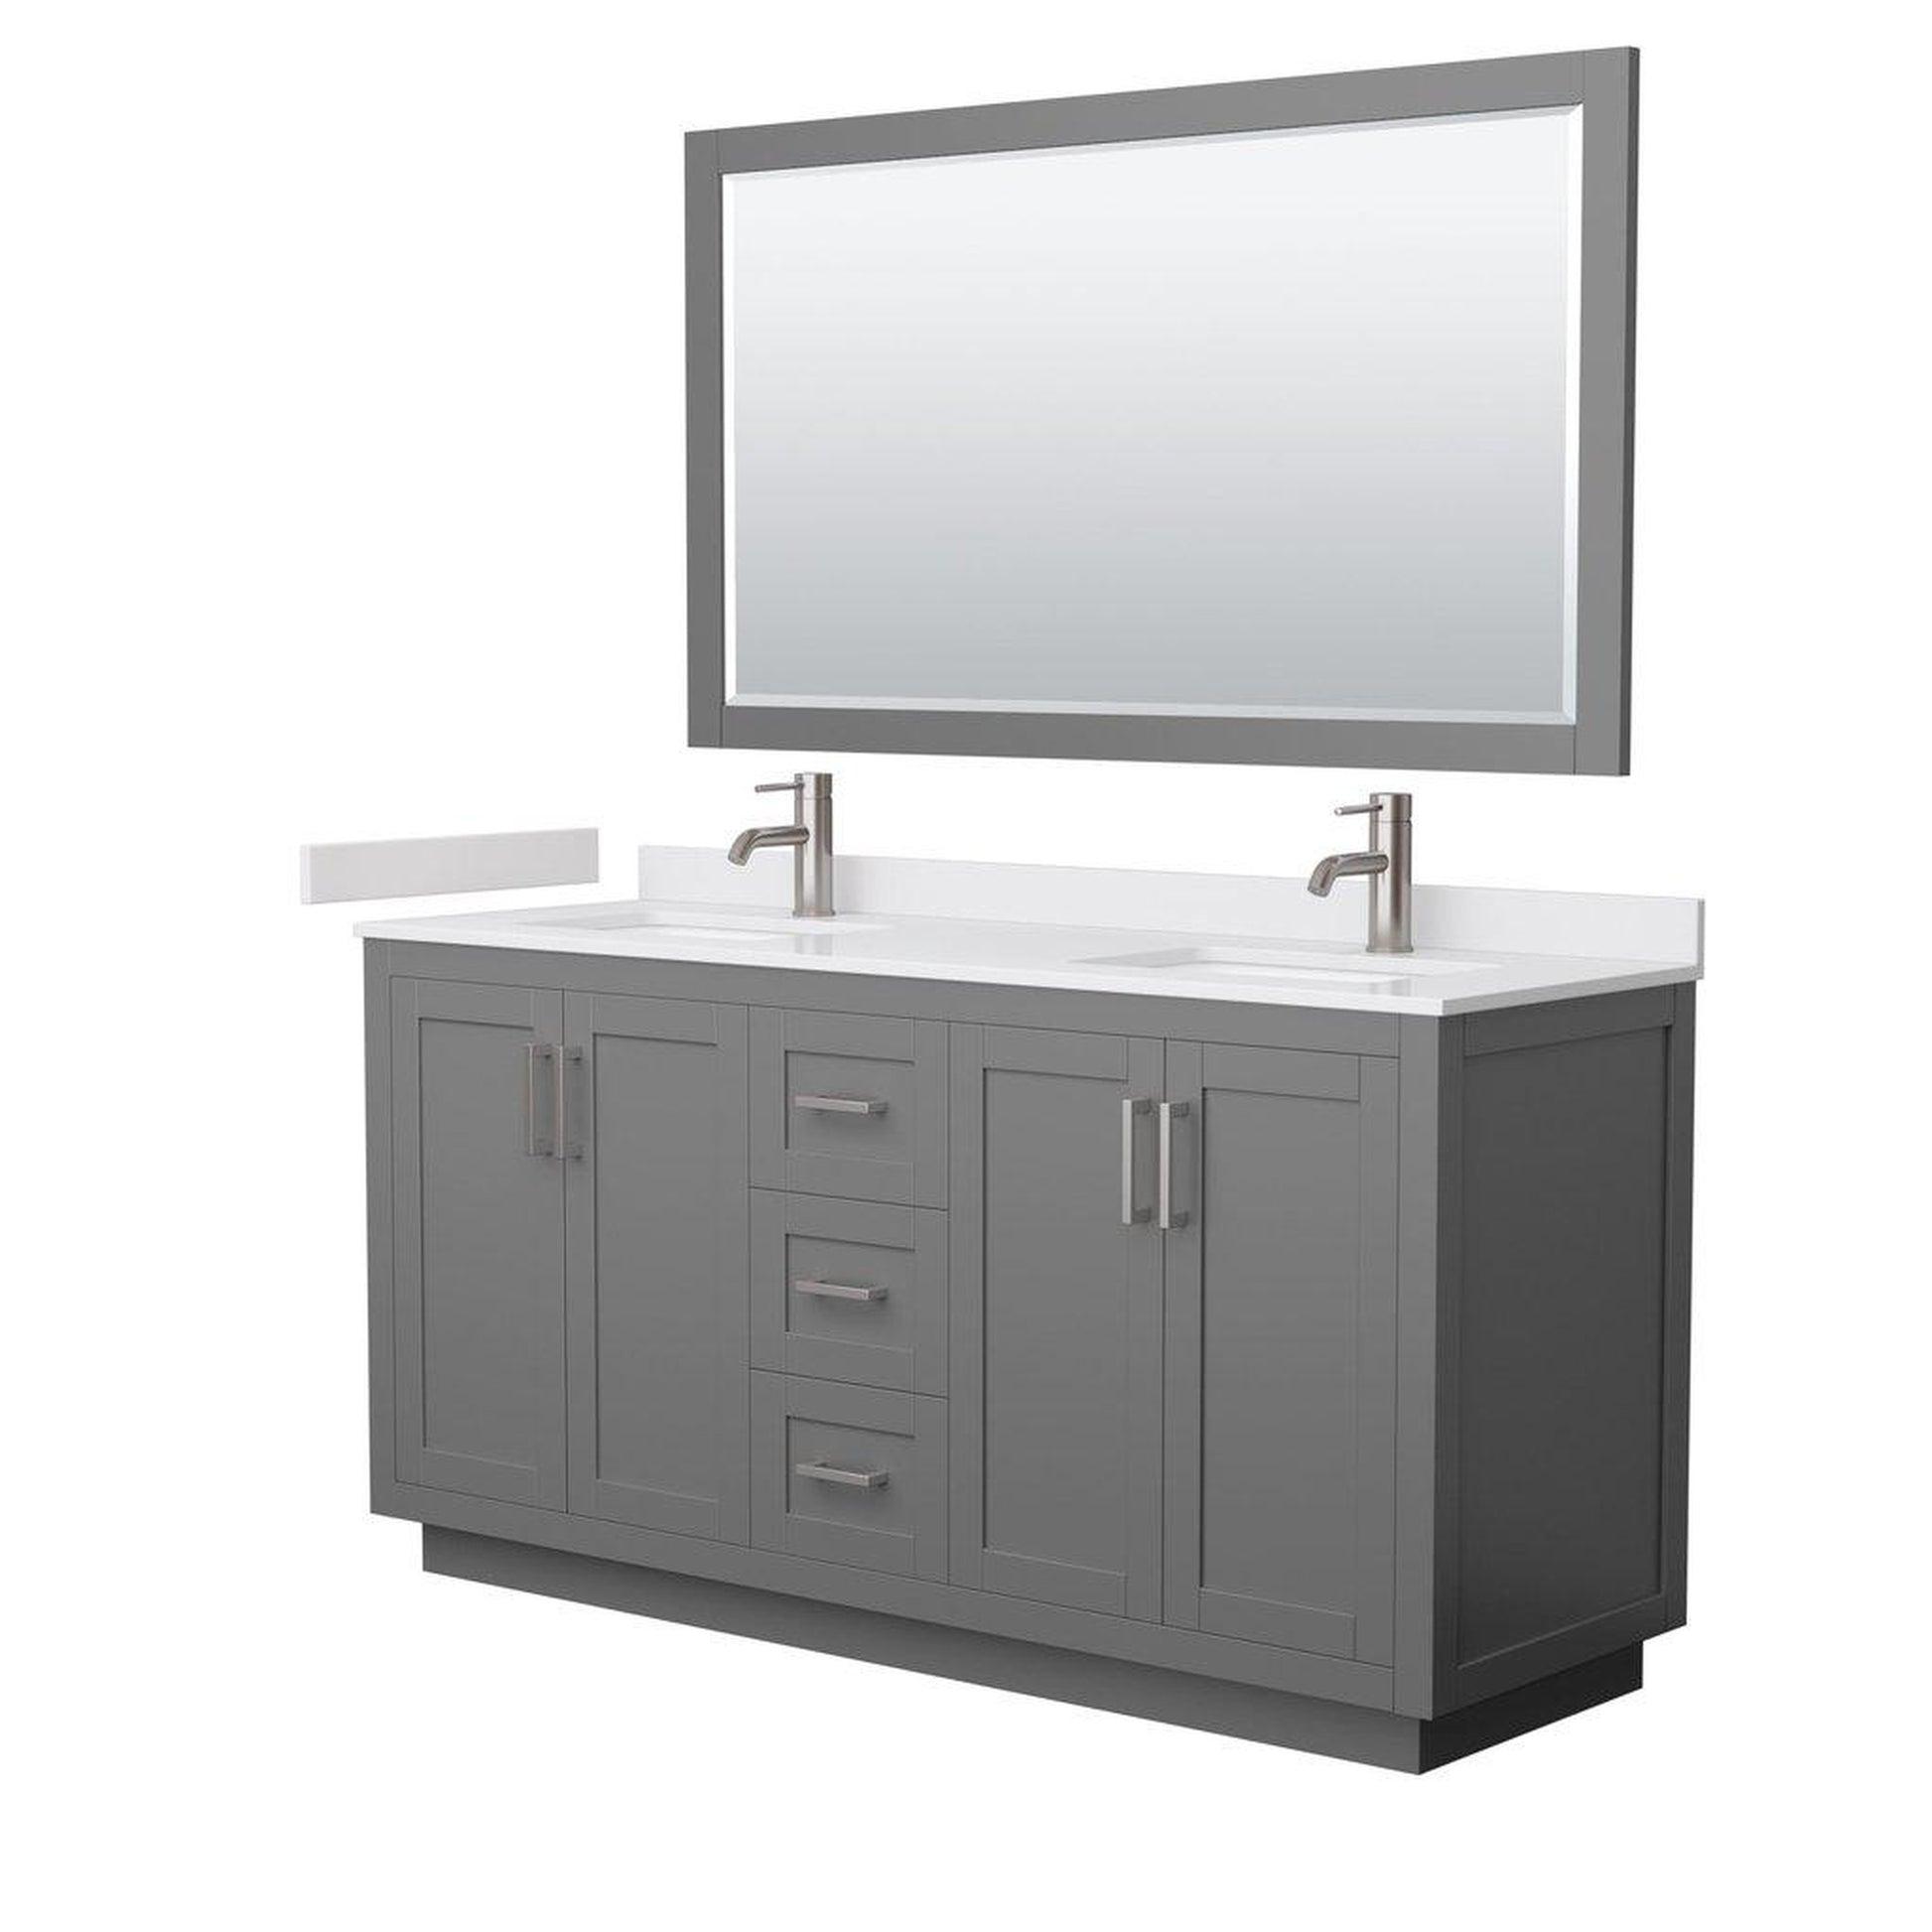 Wyndham Collection Miranda 66" Double Bathroom Dark Gray Vanity Set With White Cultured Marble Countertop, Undermount Square Sink, 58" Mirror And Brushed Nickel Trim